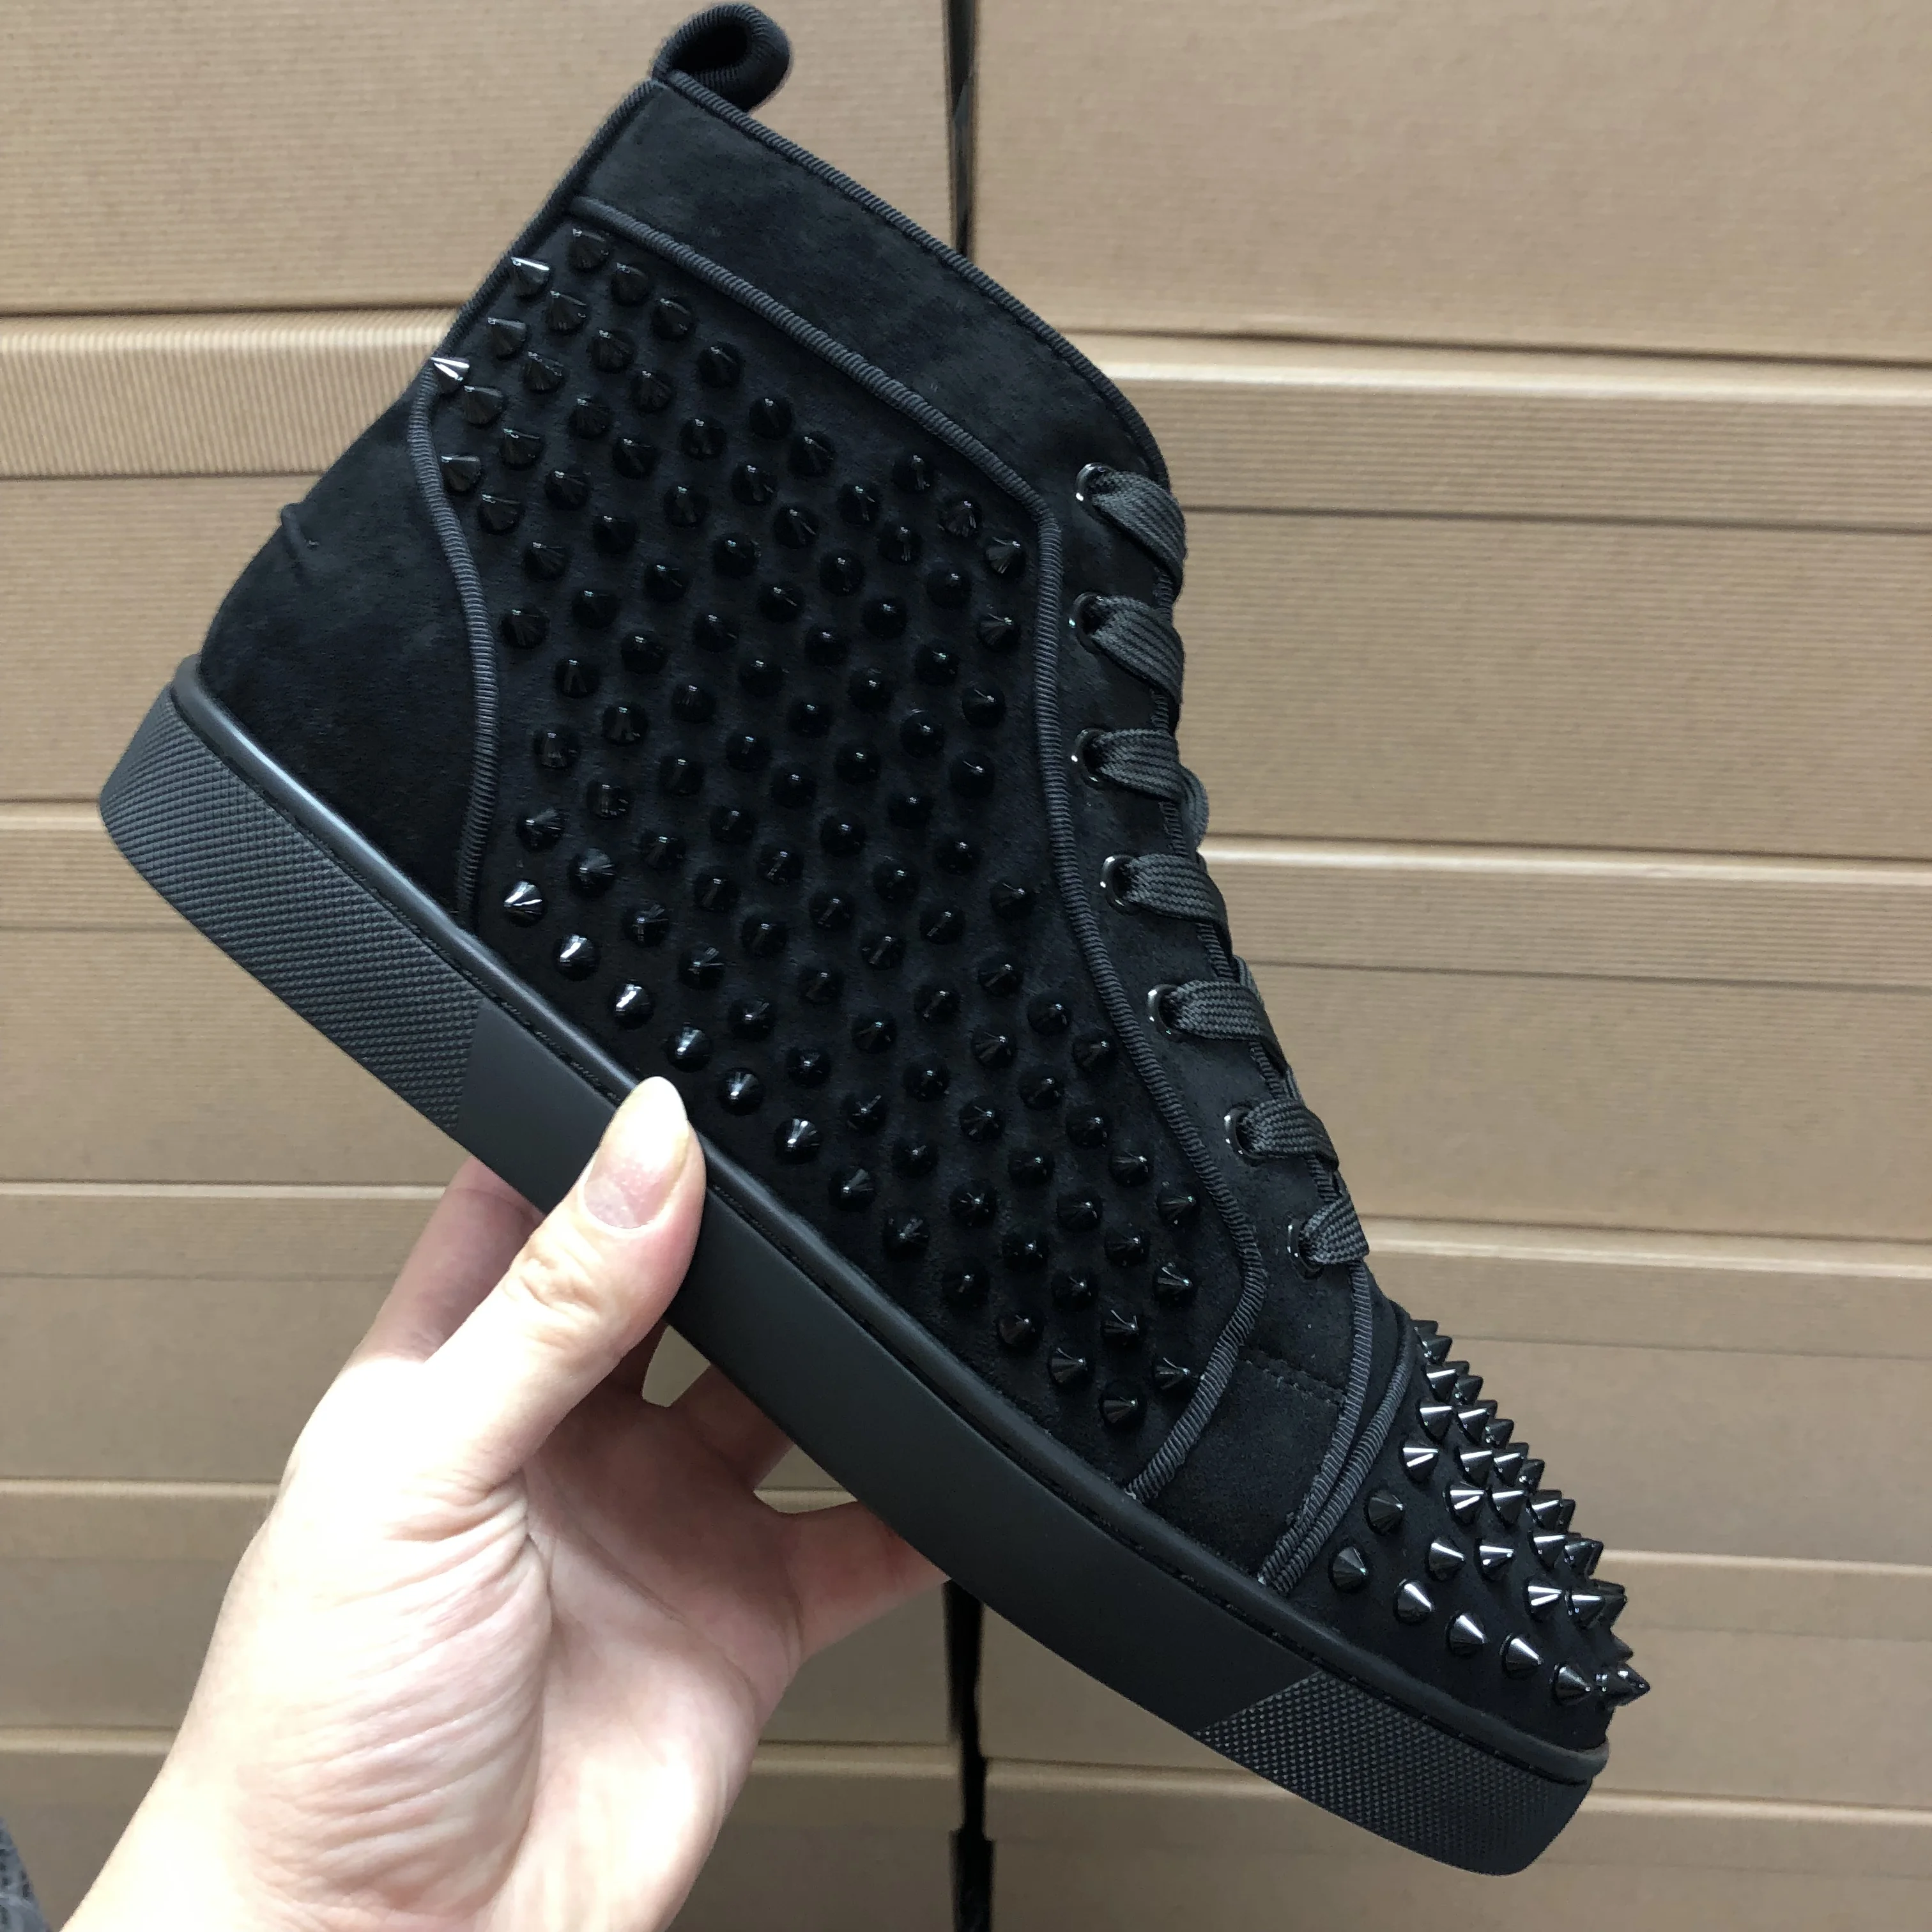 Wholesale Hightop Brand Black Red Bottoms Mens Unisex Designer Red Bottom Sneakers Shoes Women with Spikes From m.alibaba.com